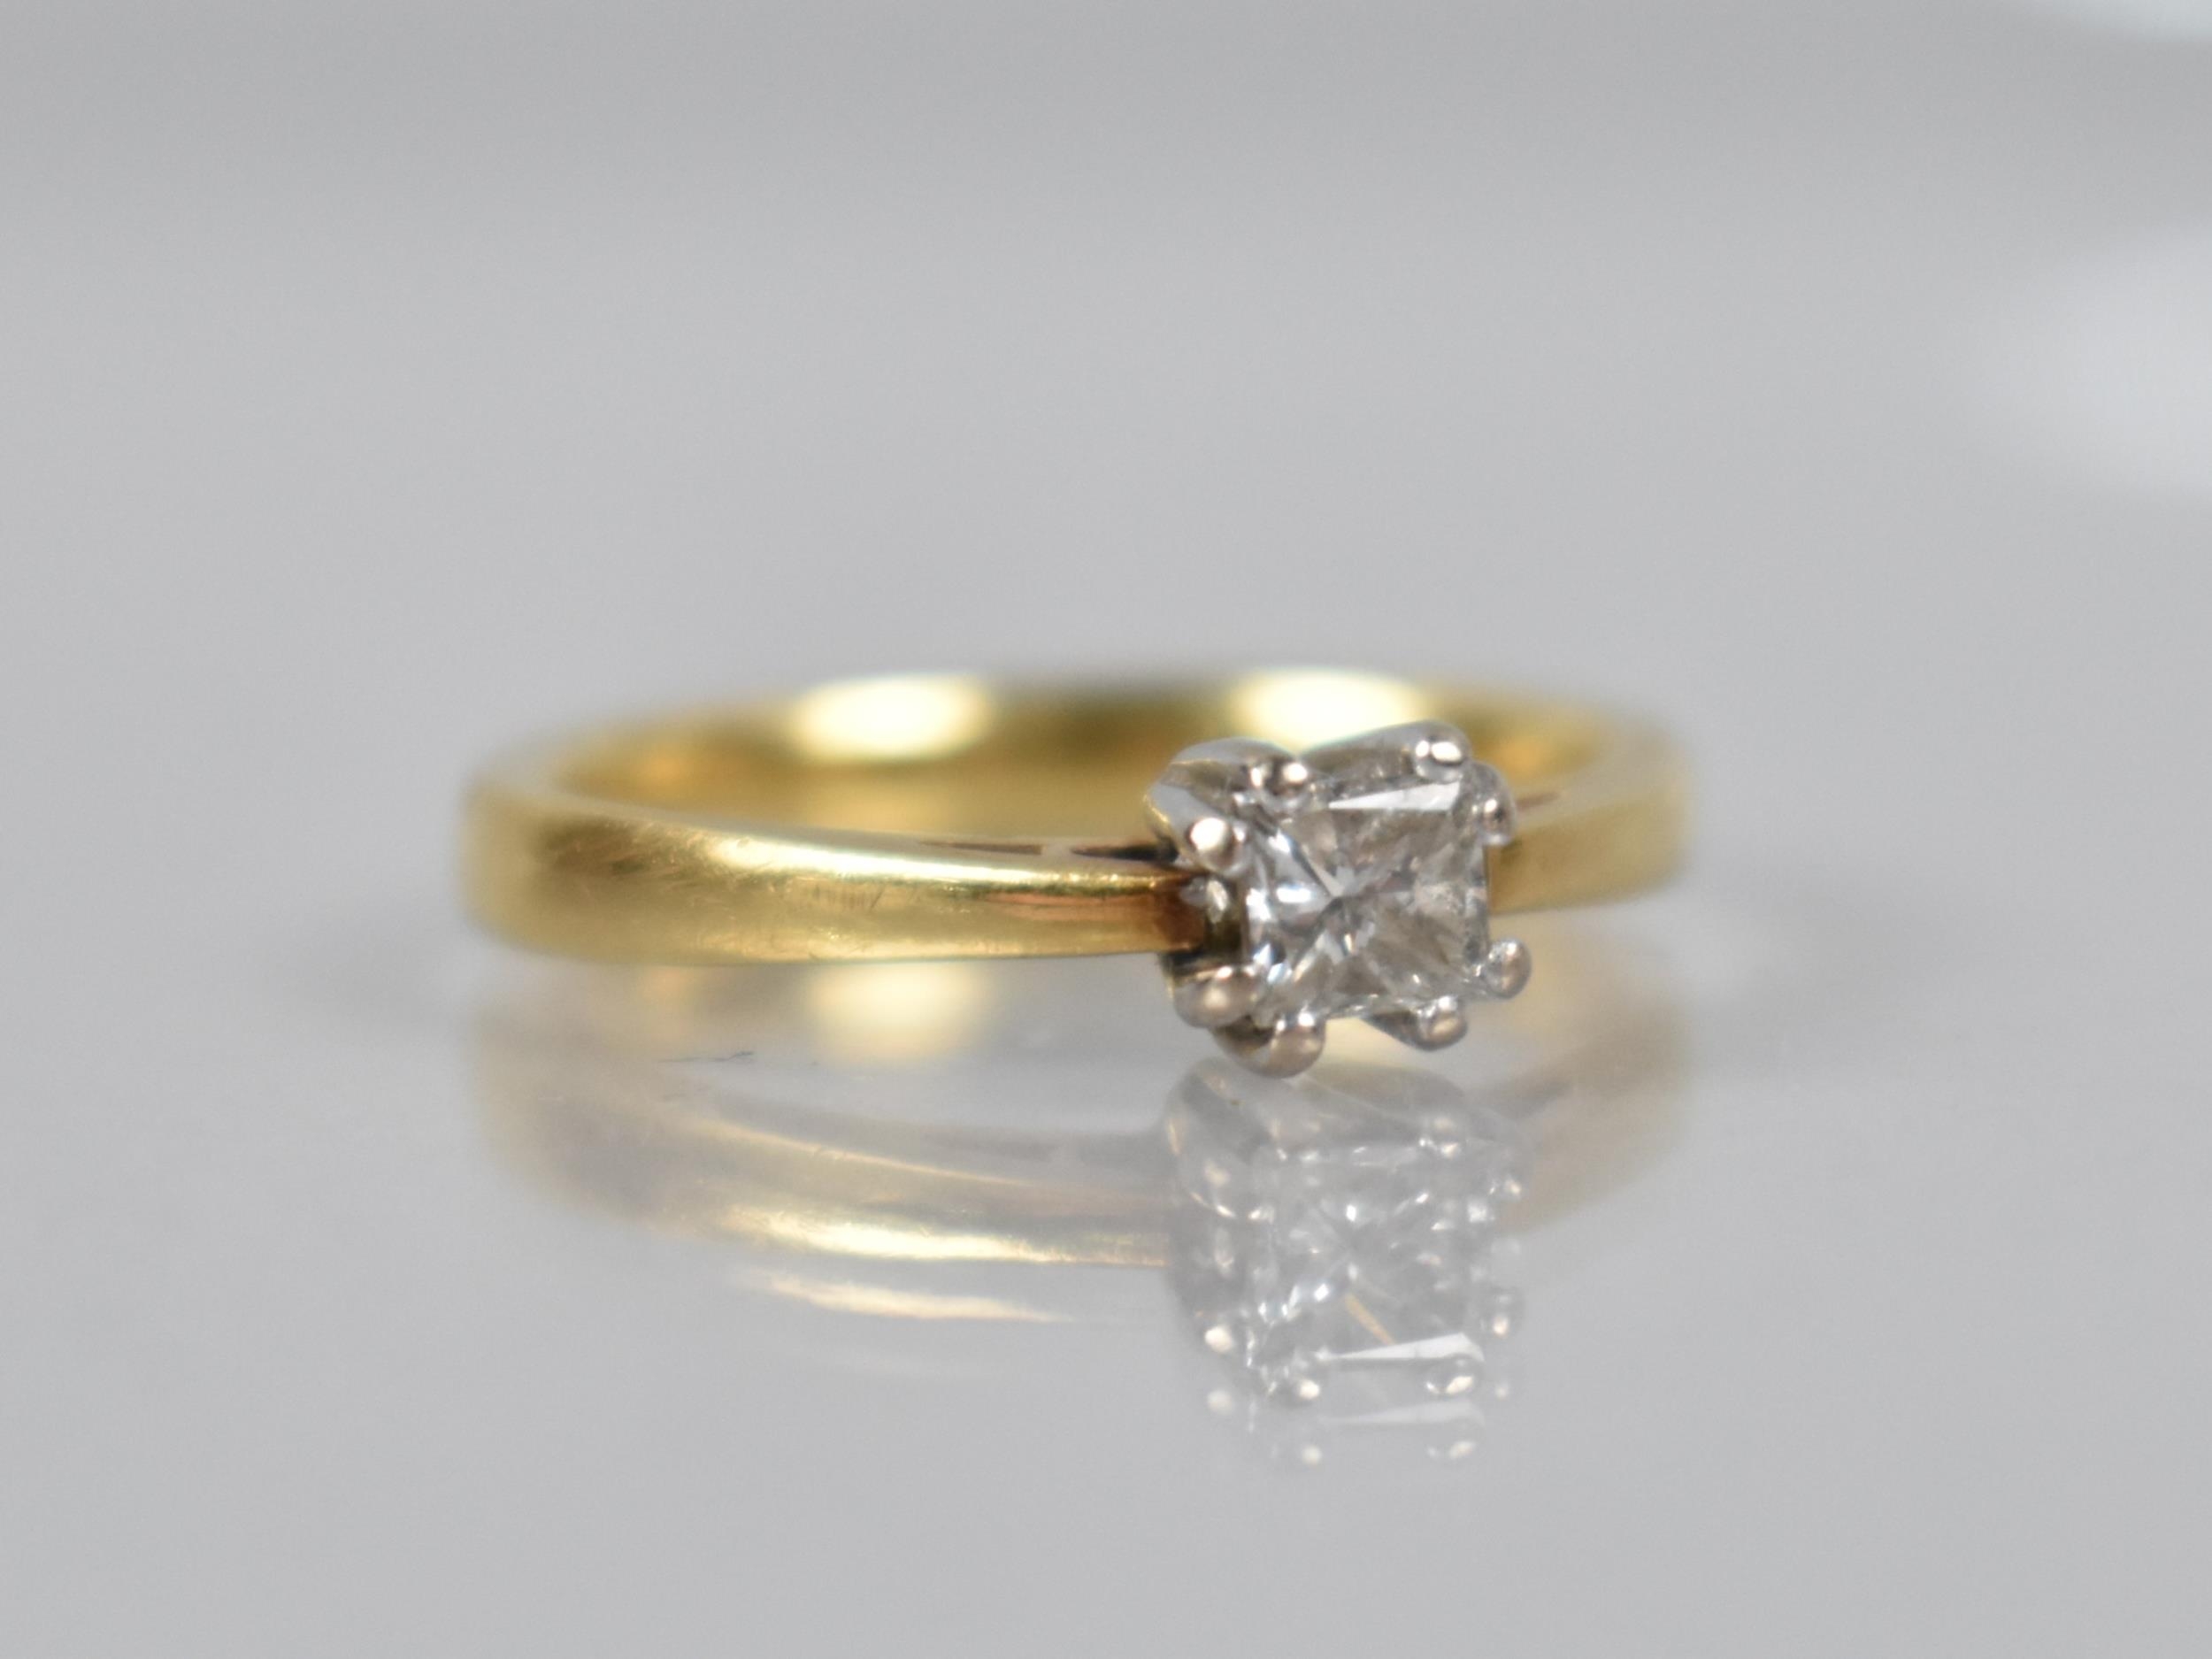 A 18ct Gold Princess Cut Diamond Solitaire Ring, Stone Measuring 3.75x3.9mm (Approx 0.37ct), Set - Image 2 of 4